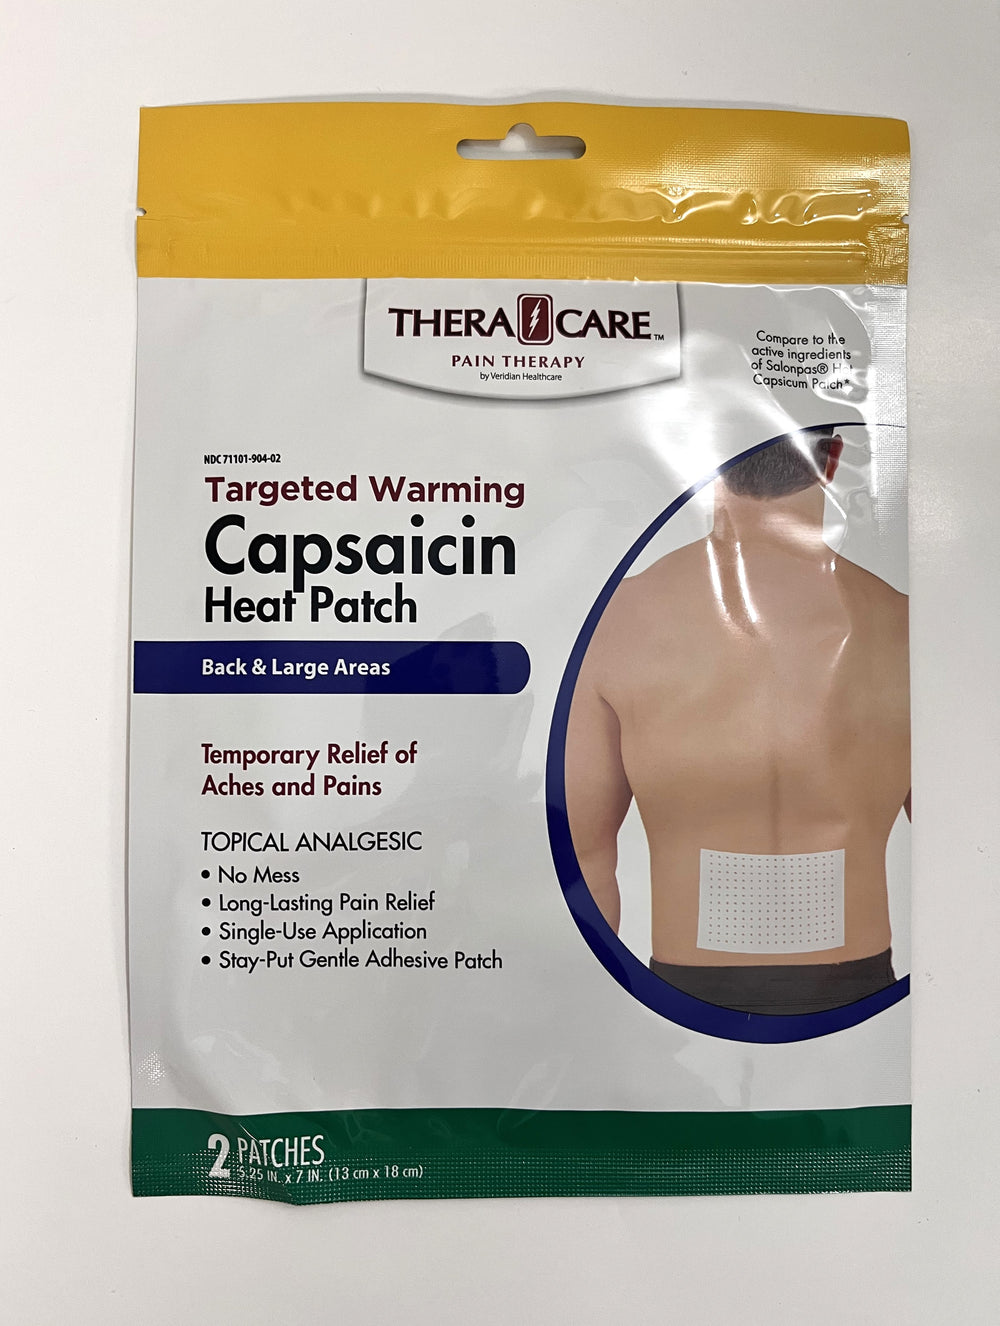 TheraCare Capsaicin Analgesic Heat Patch, 2 patches per pouch, 20 pouches, provides deep, warming pain relief for sore muscles and joints.